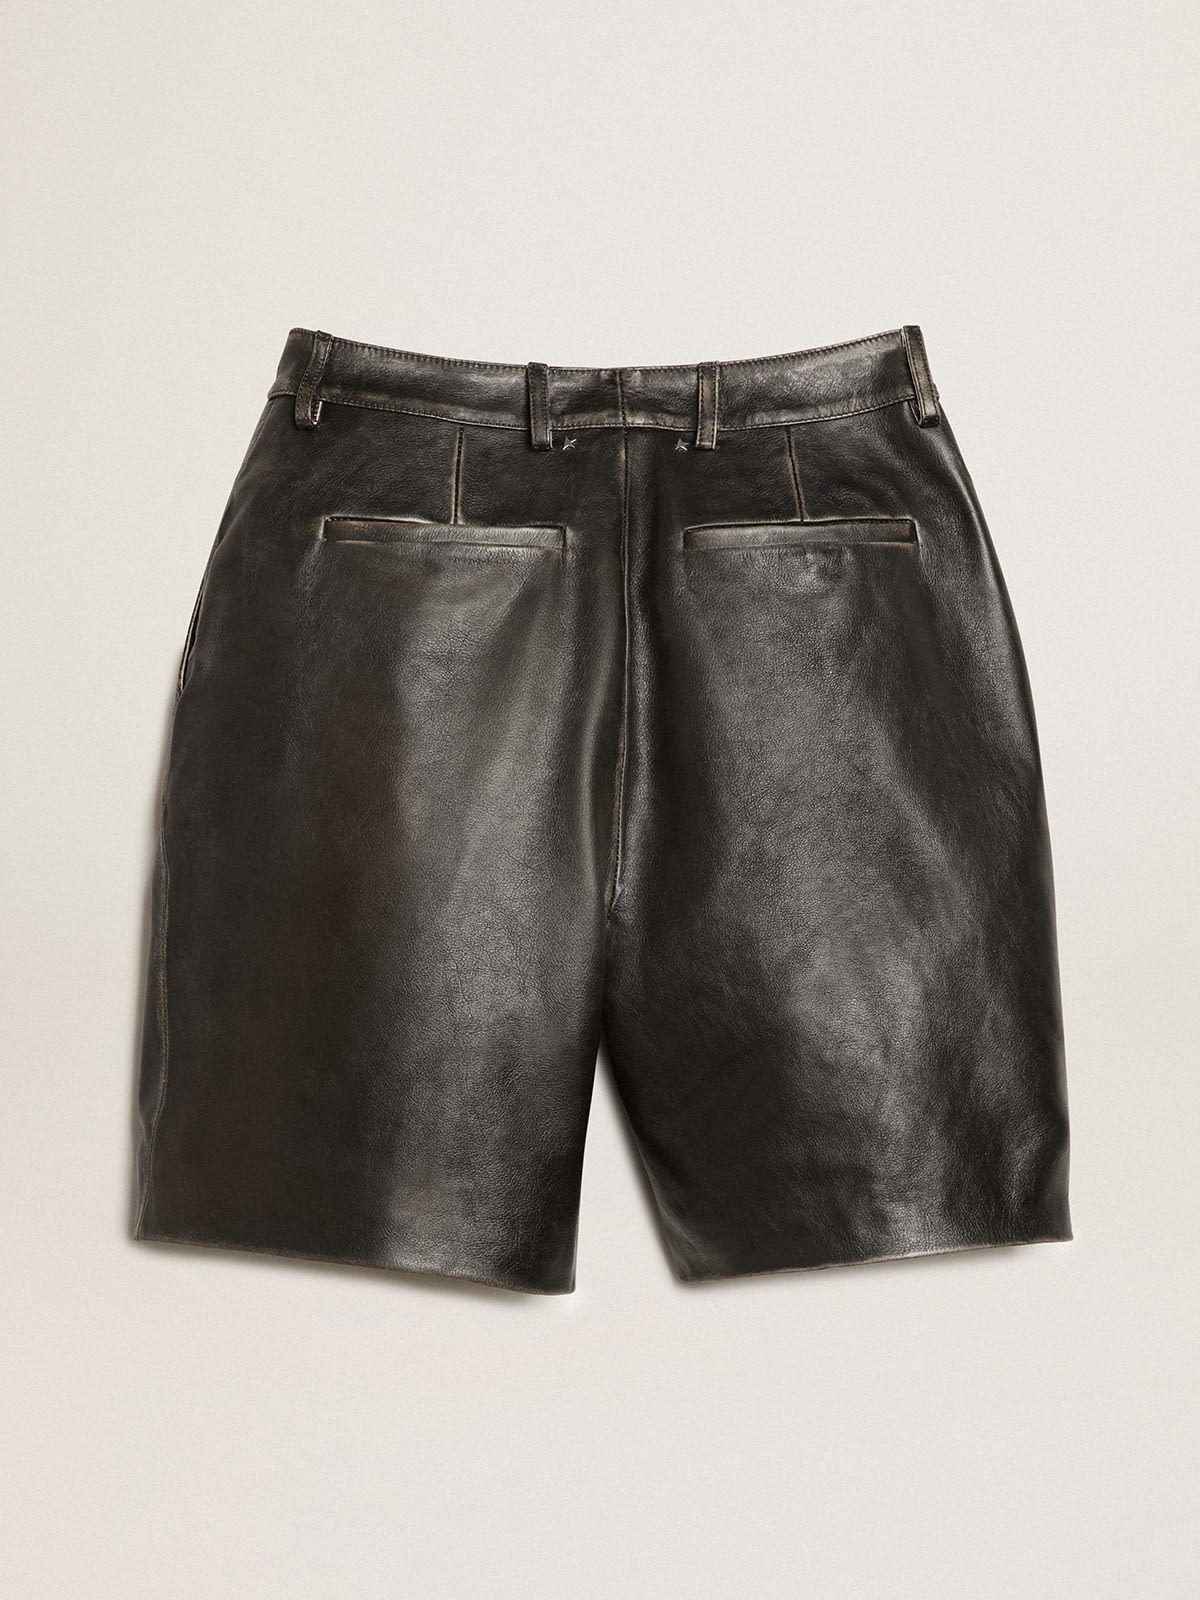 Golden Goose - Black leather Bermuda shorts with lived-in effect in 